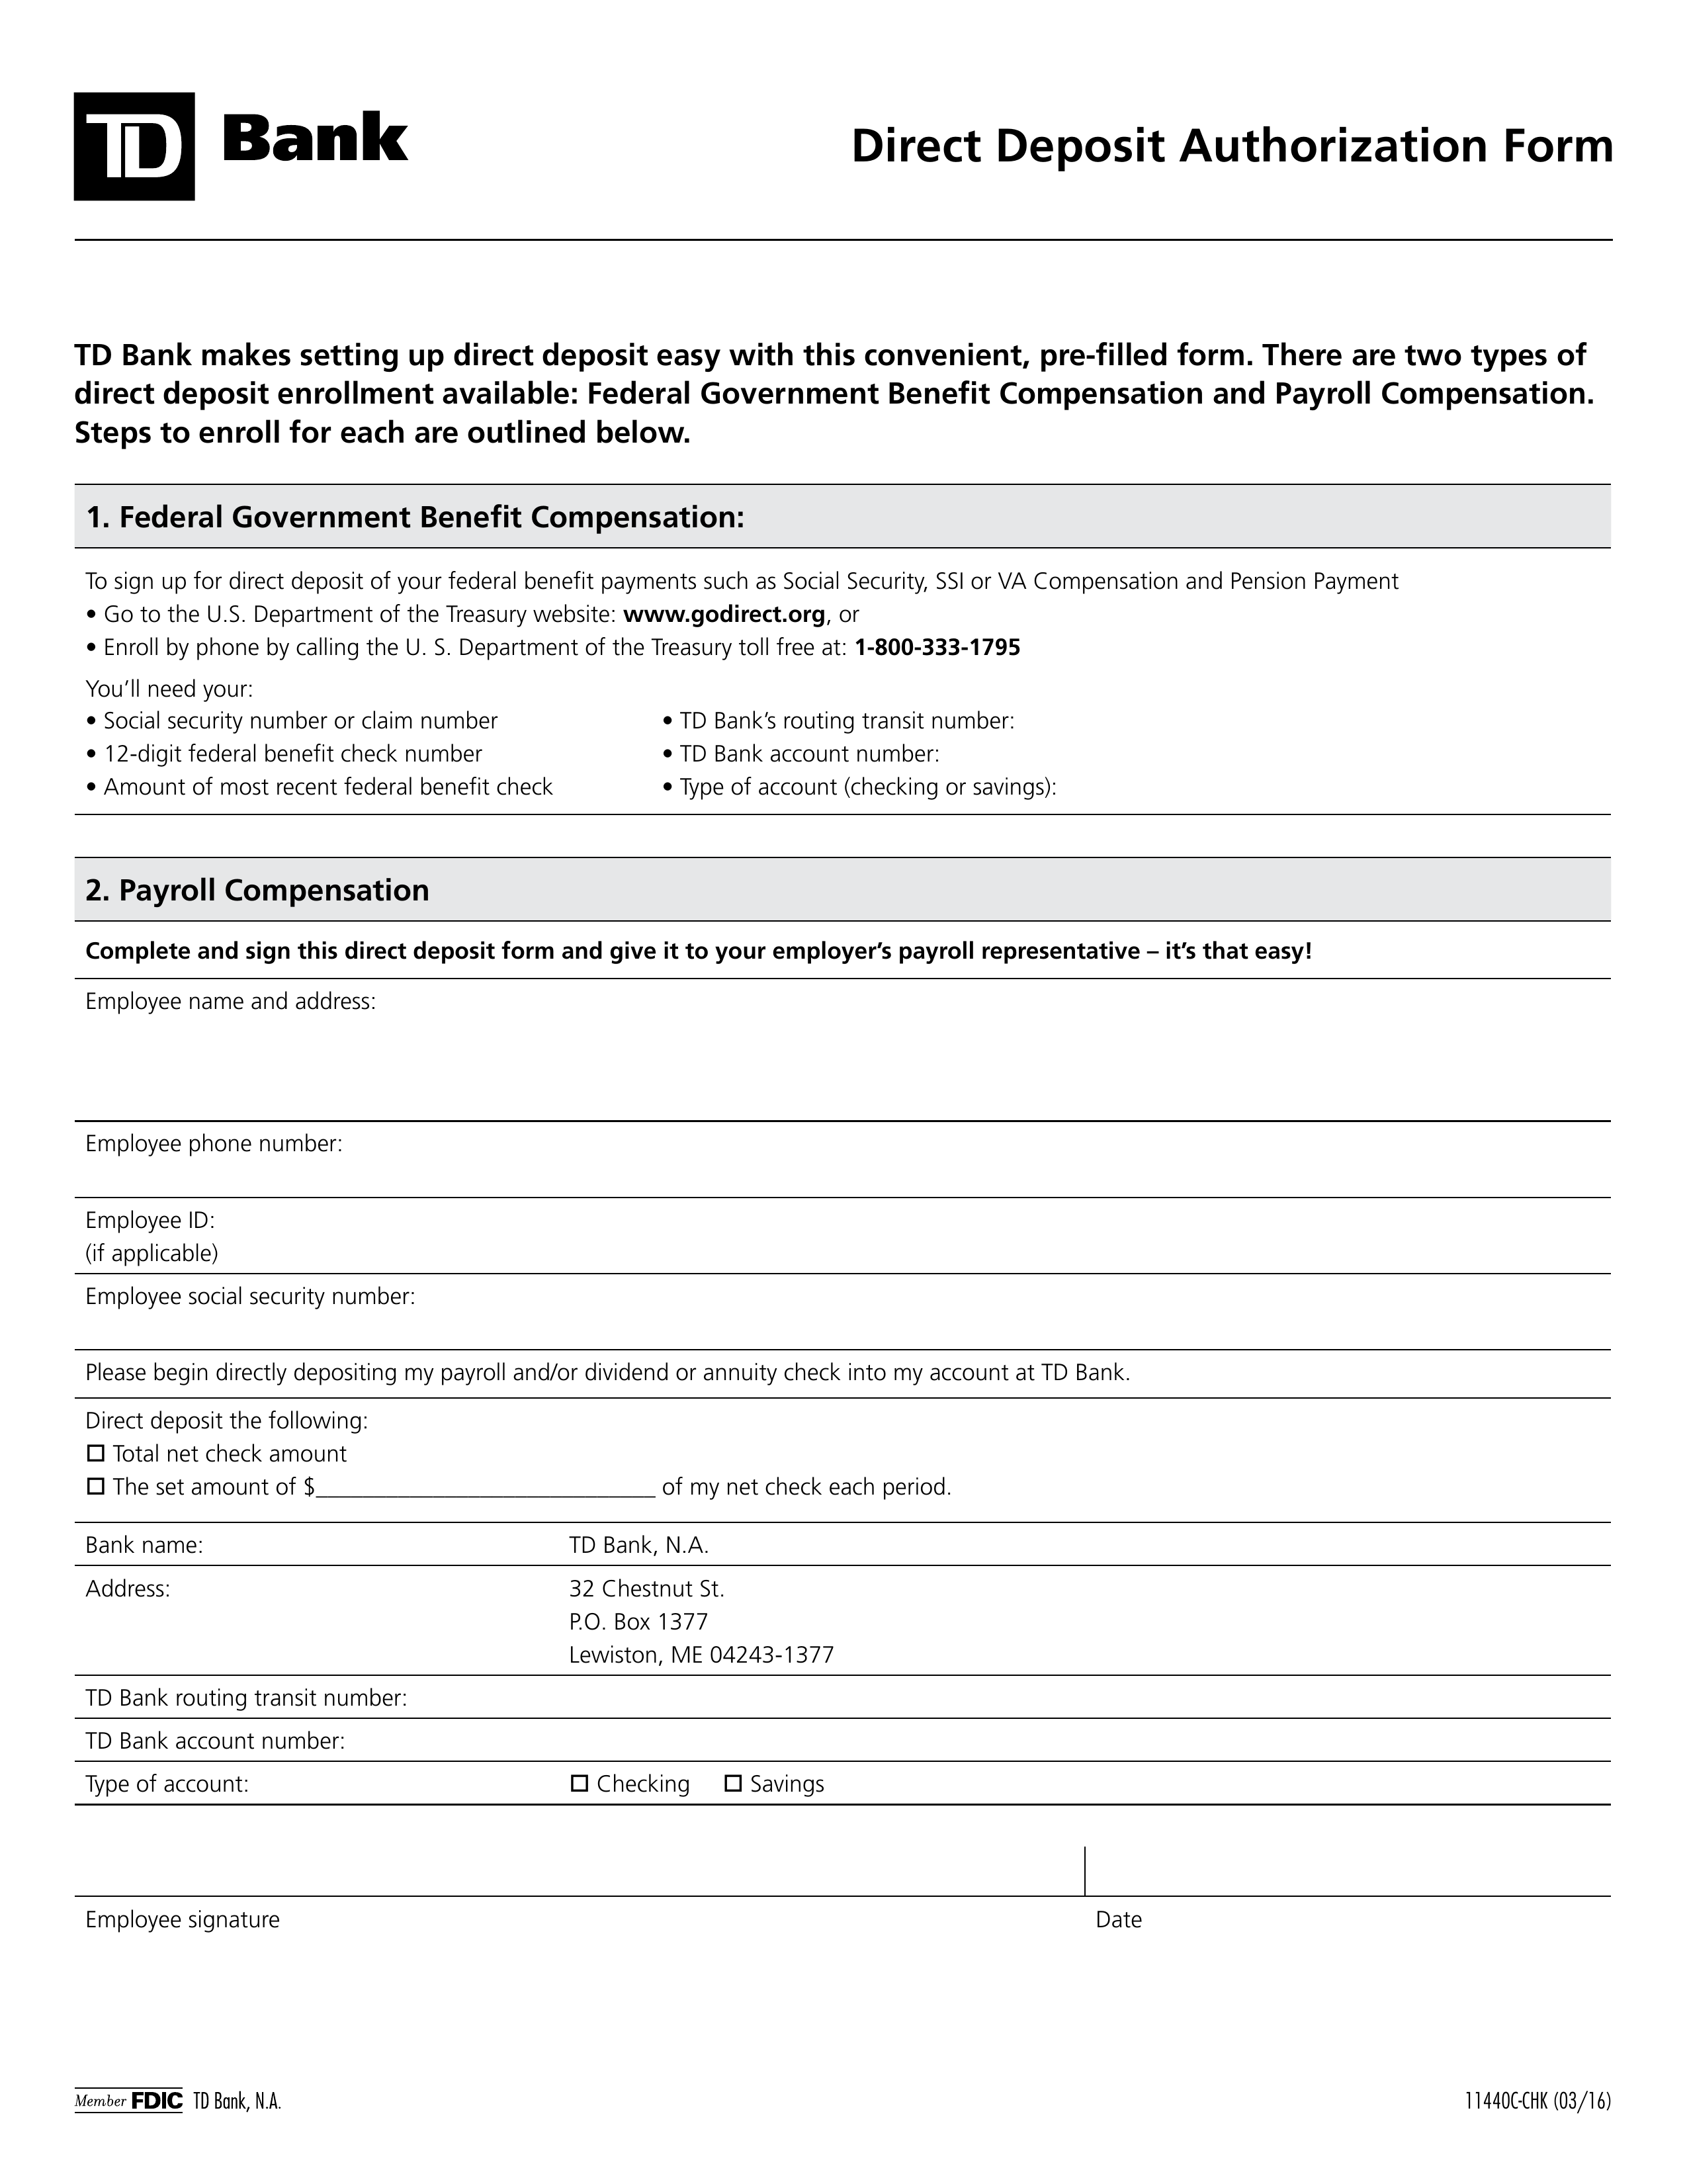 Free TD Bank Direct Deposit Authorization Form - PDF – eForms Within Federal Government Direct Deposit Form With Regard To Federal Government Direct Deposit Form